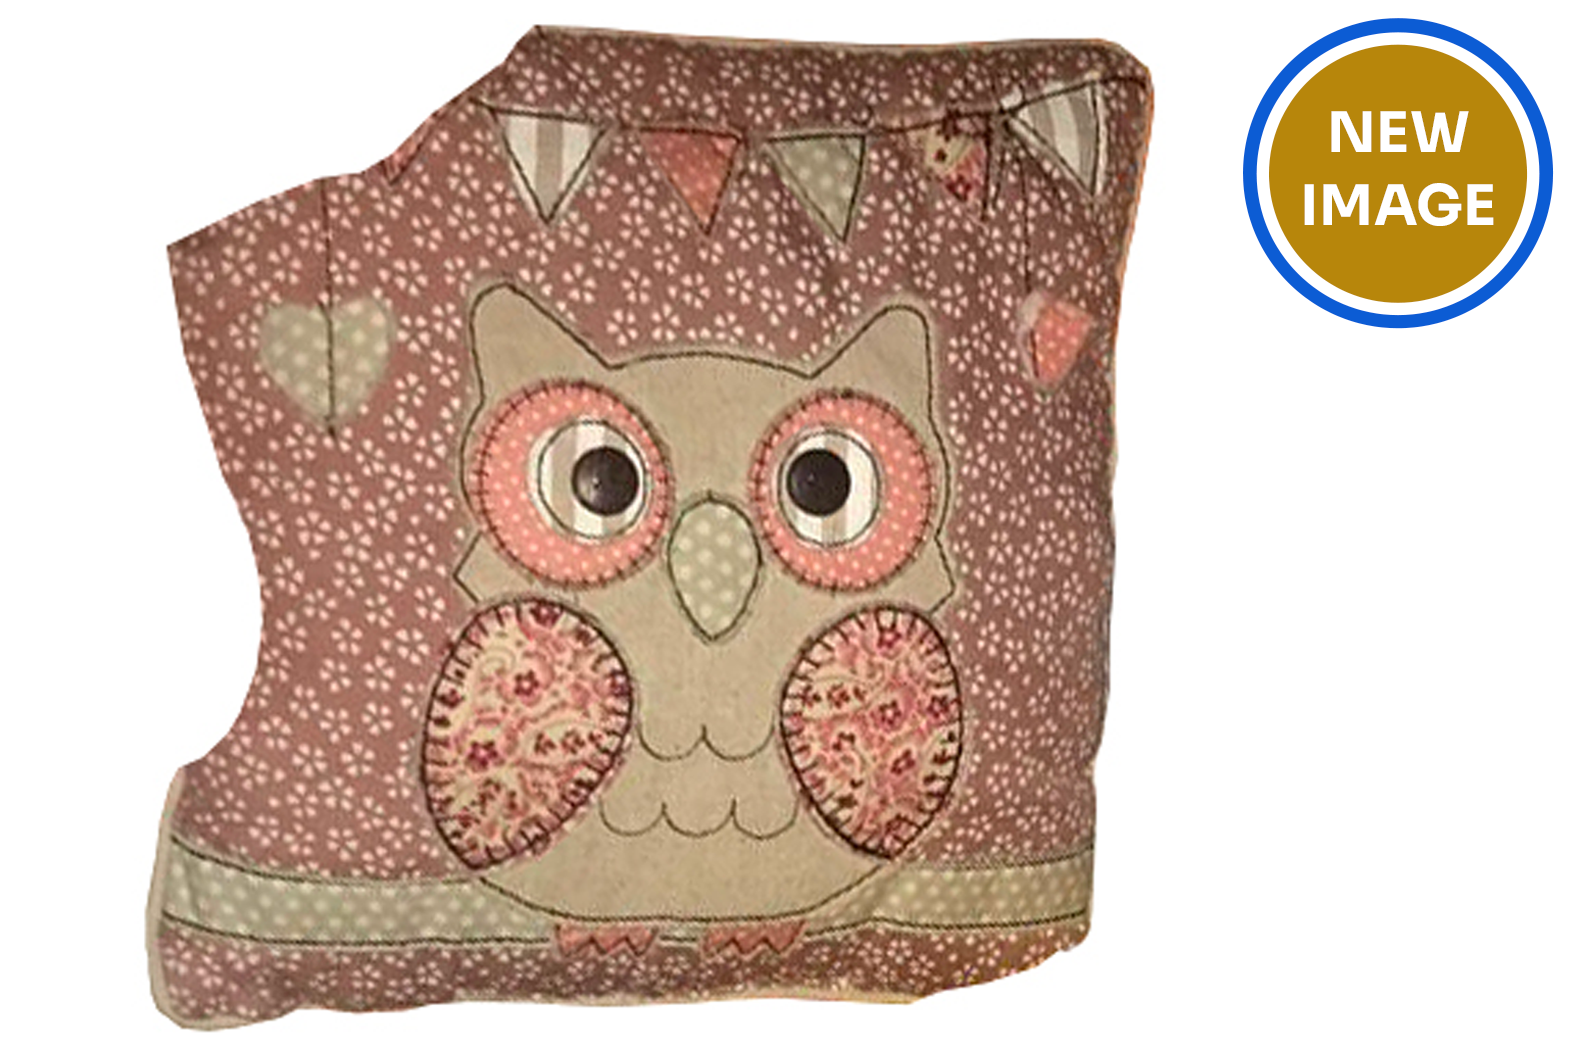 Maroon, pink and grey cushion depicting an owl and floral pattern